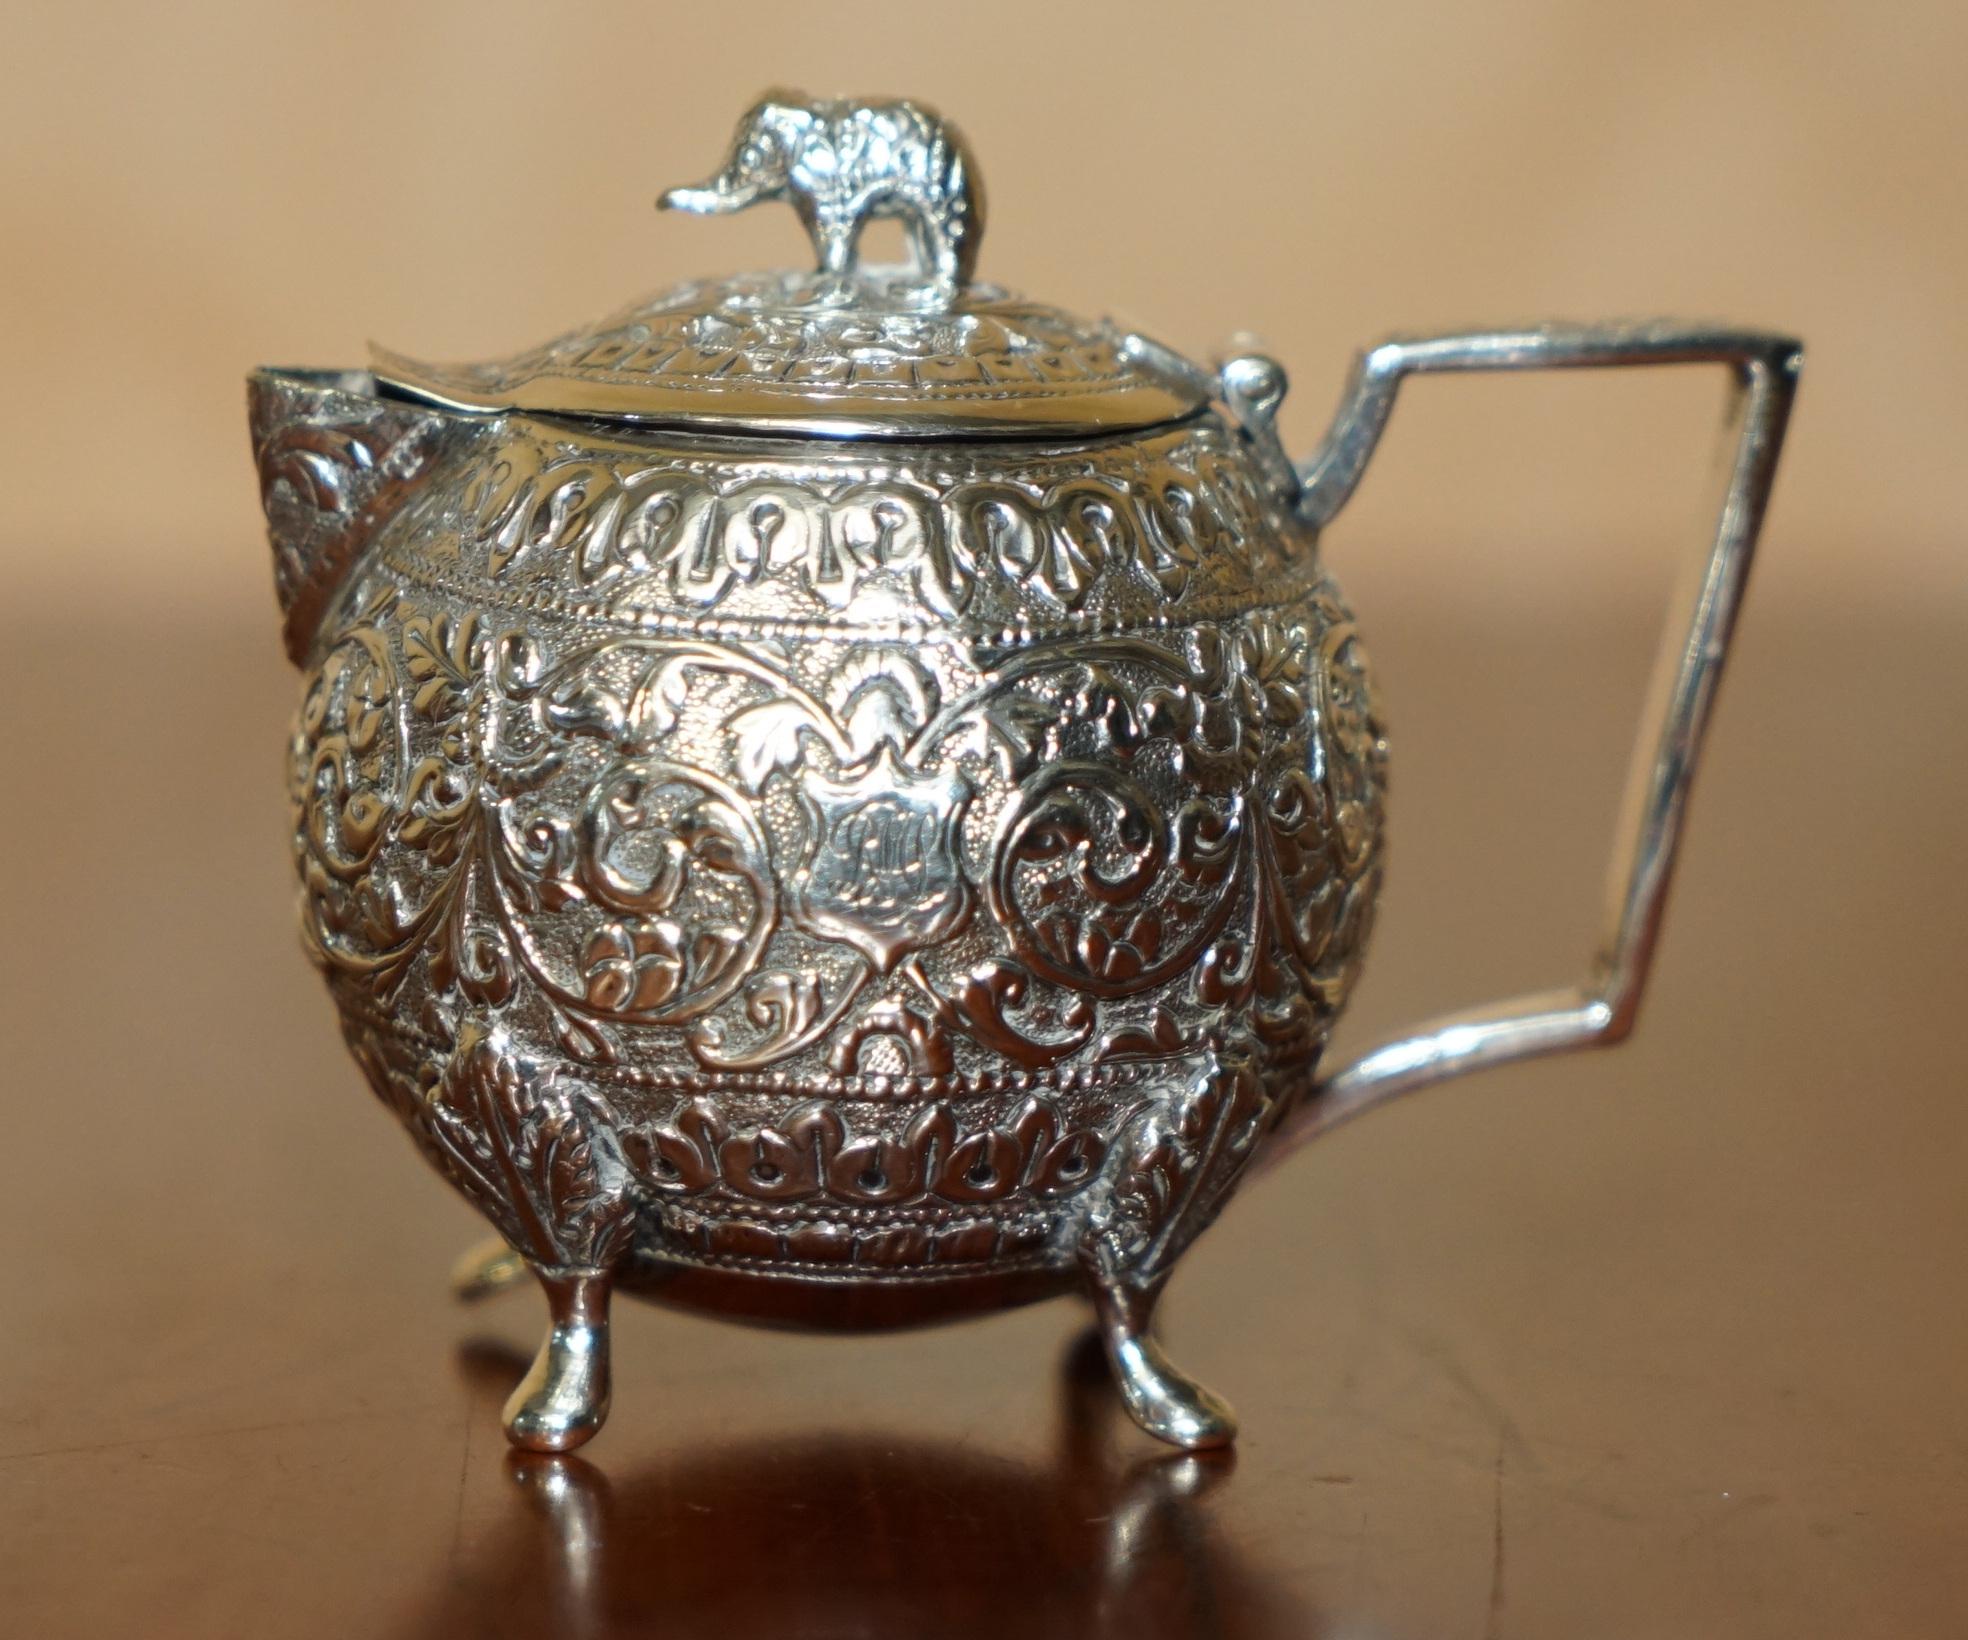 ANTIQUE INDIAN ELEPHANT COLONIAL SOLiD SILVER TEA SERVICE OOMERSI MAWJI & SONS For Sale 10